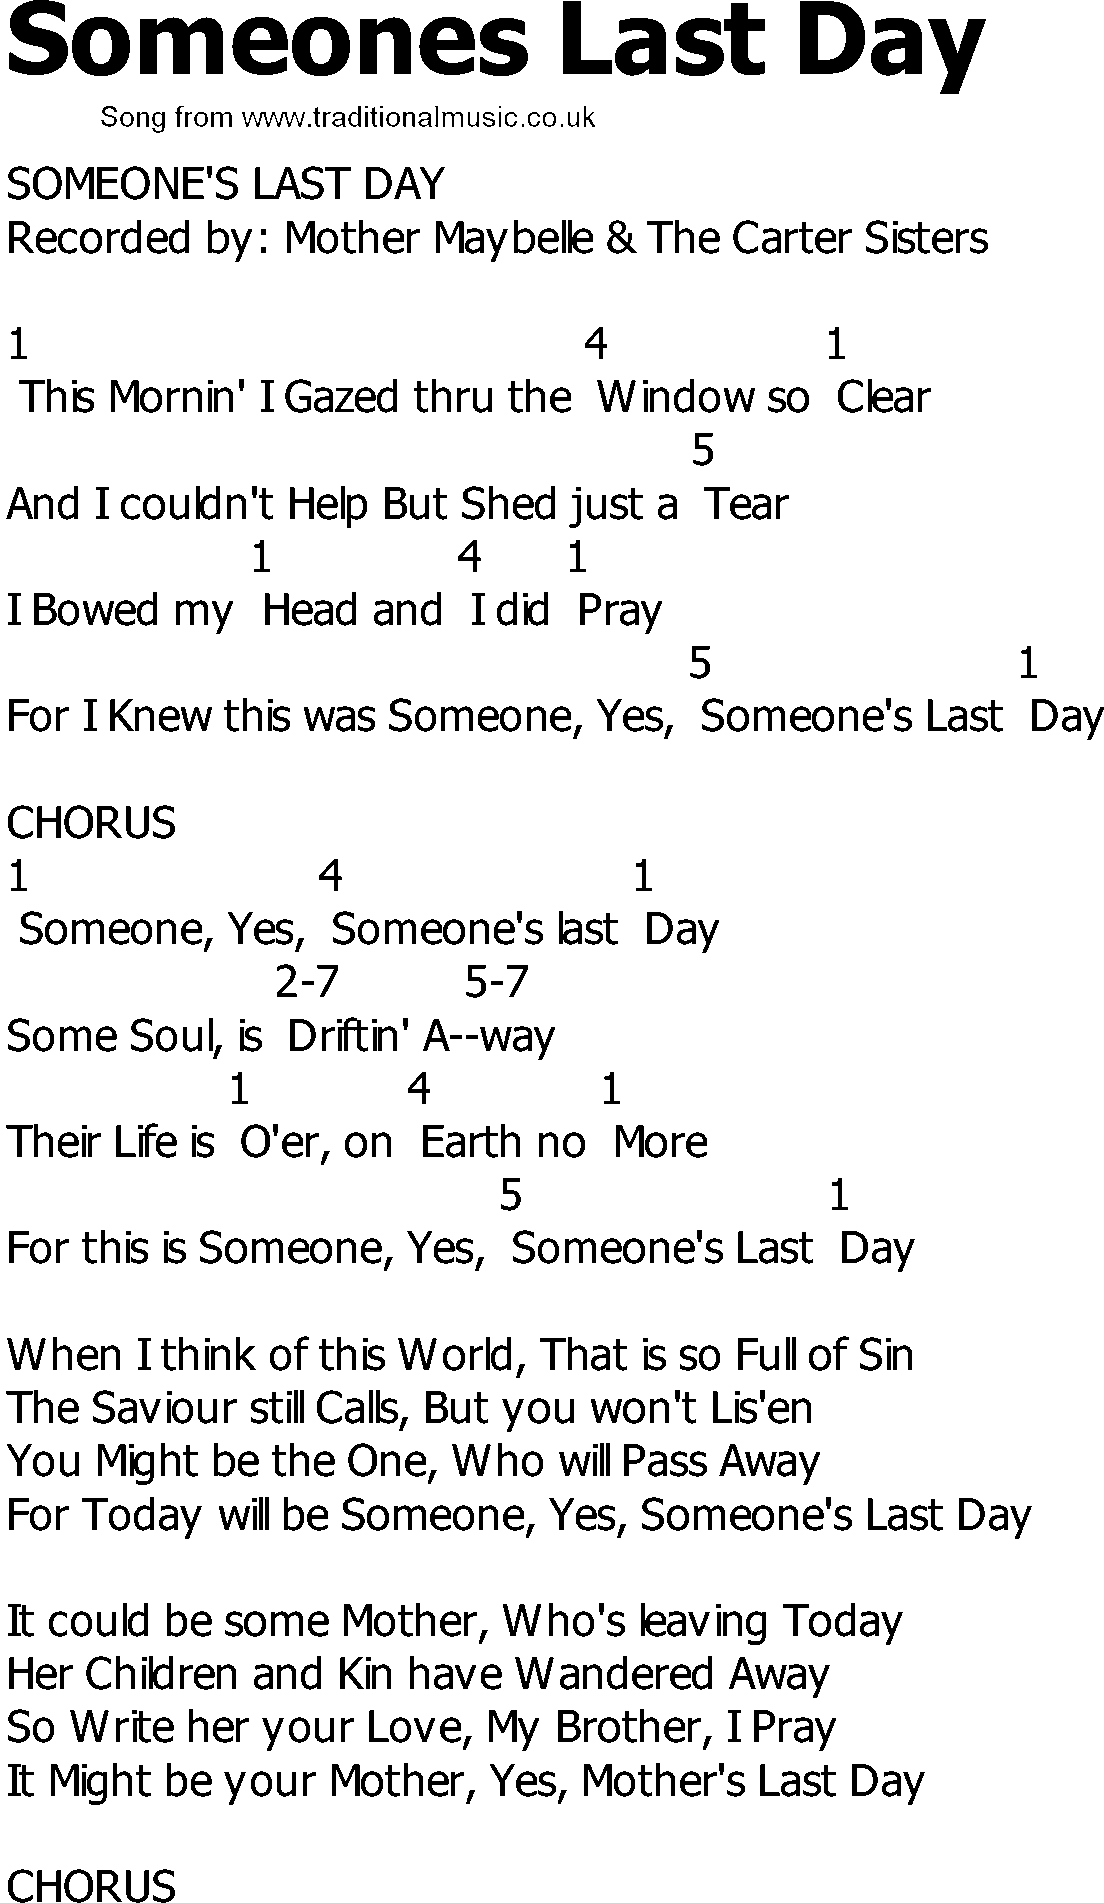 Old Country song lyrics with chords - Someones Last Day